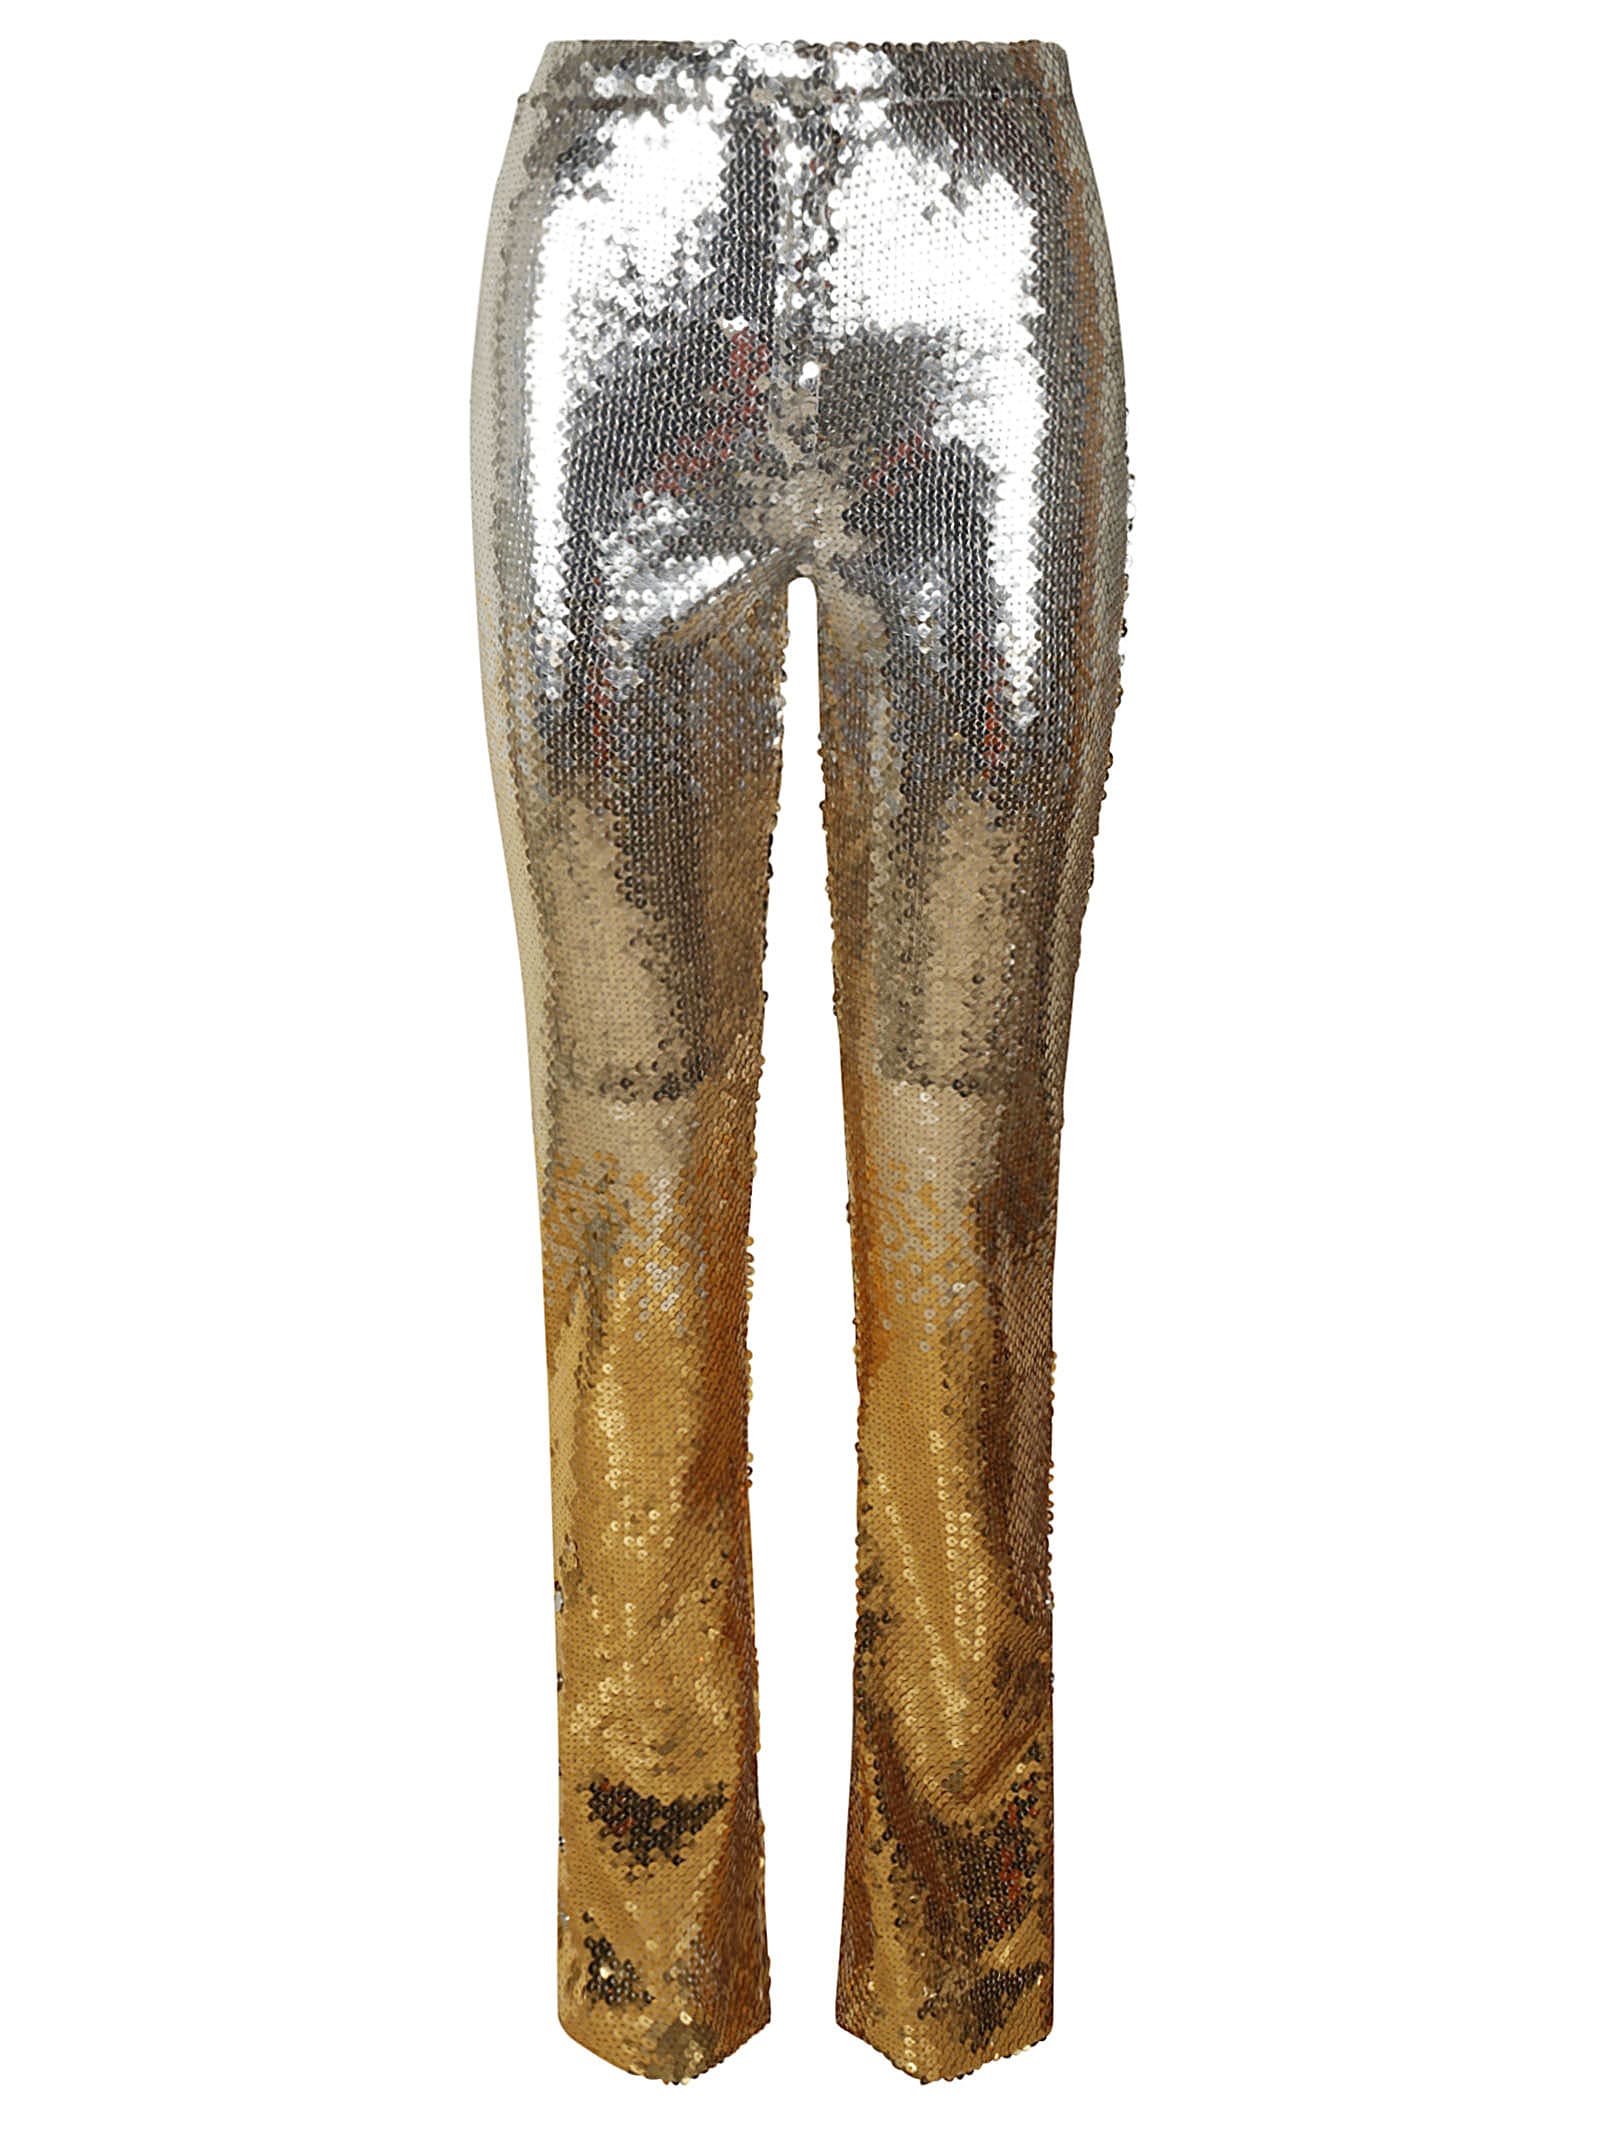 Paco Rabanne All-over Metallic Embellished Trousers